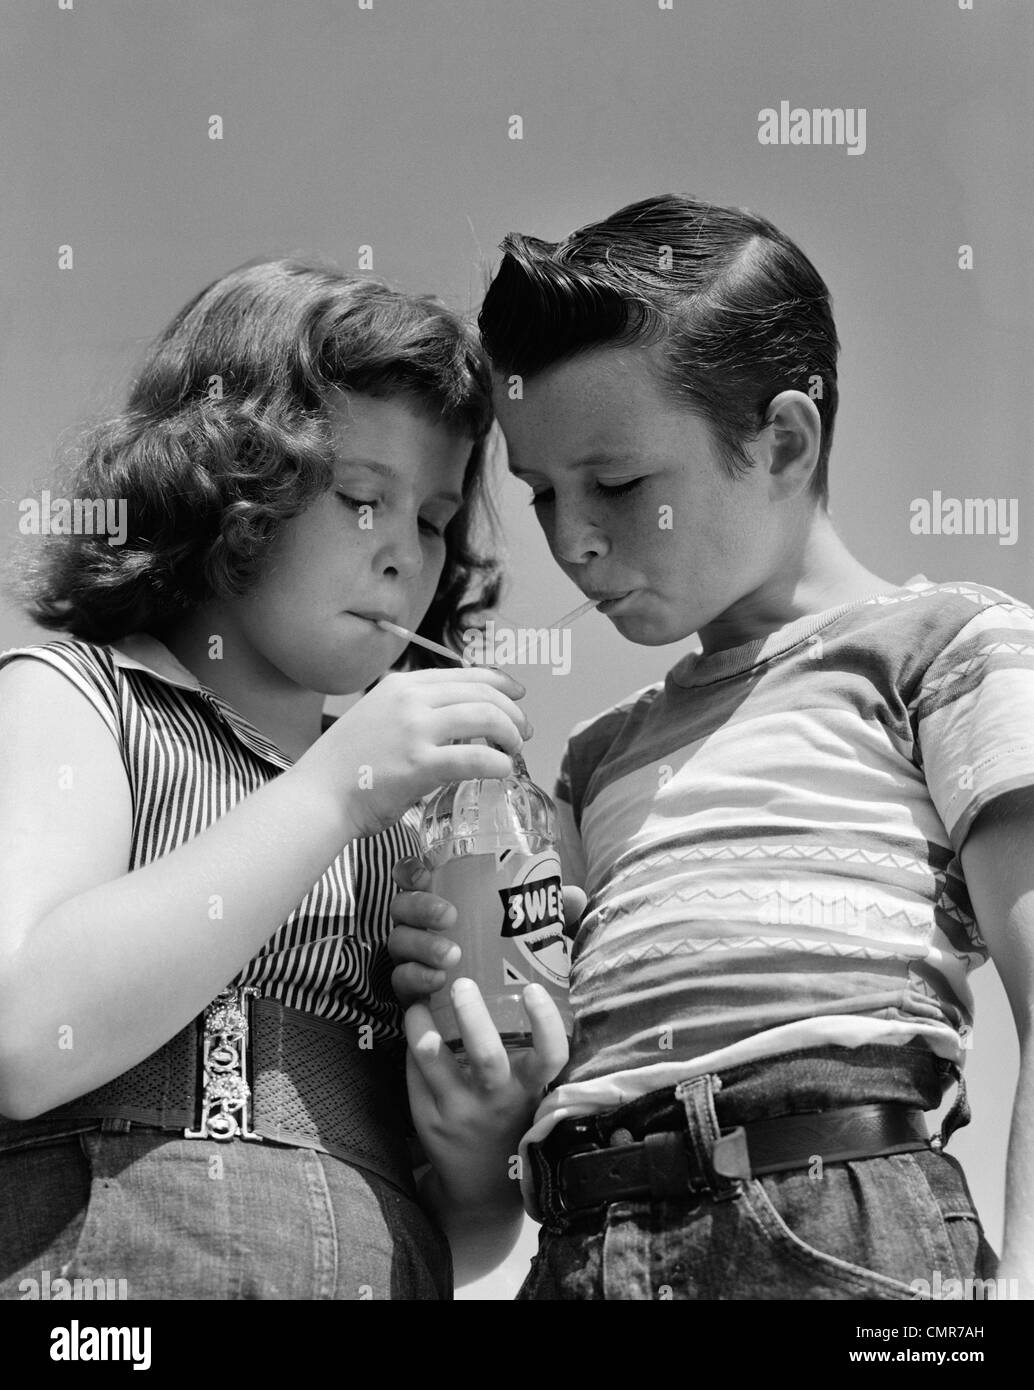 1950s GIRL AND BOY SHARE SODA TWO STRAWS SUMMER OUTDOOR Stock Photo